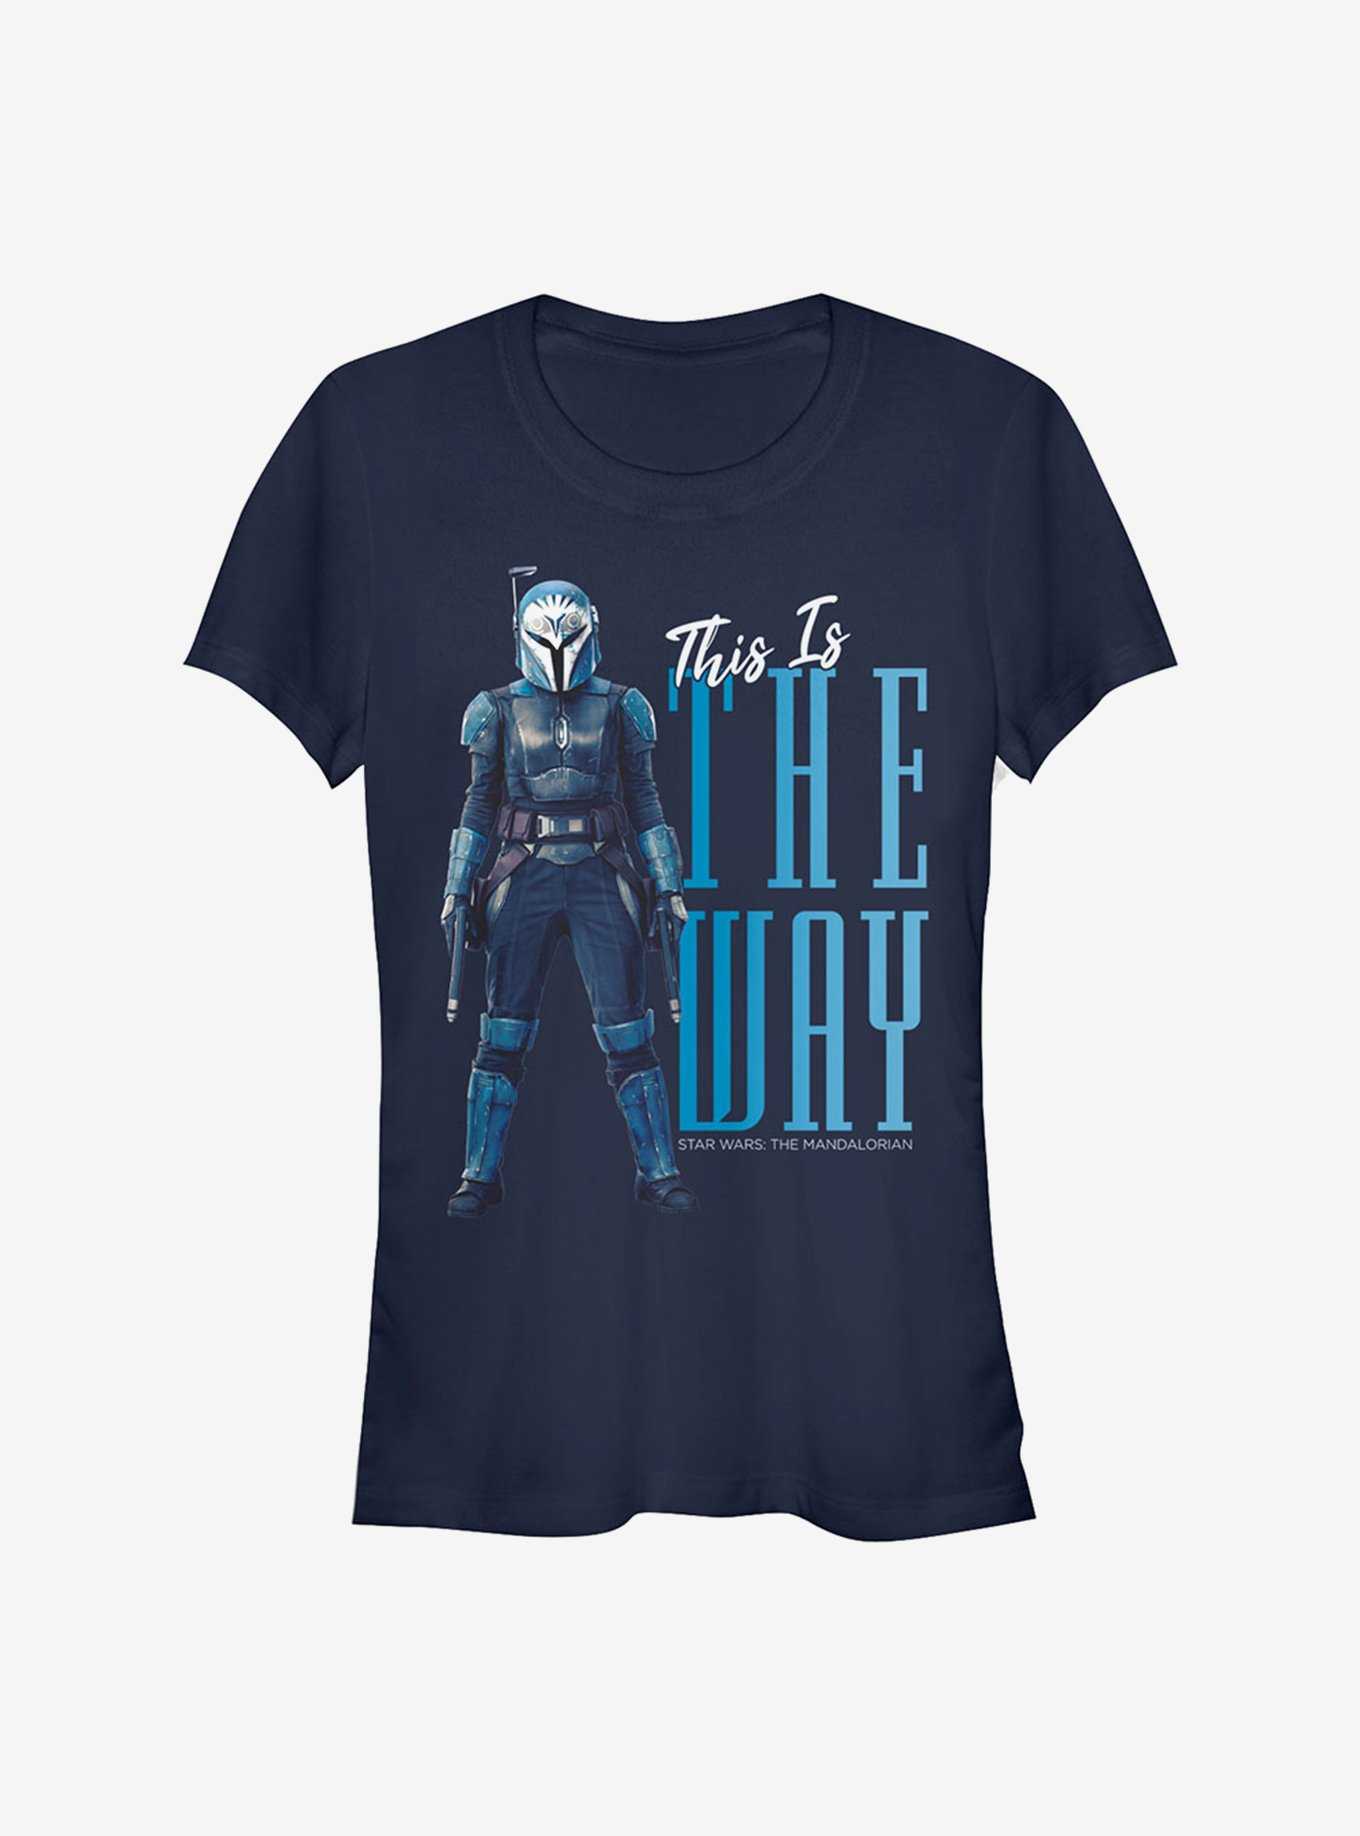 Star Wars The Mandalorian This Is The Way Girls T-Shirt, , hi-res